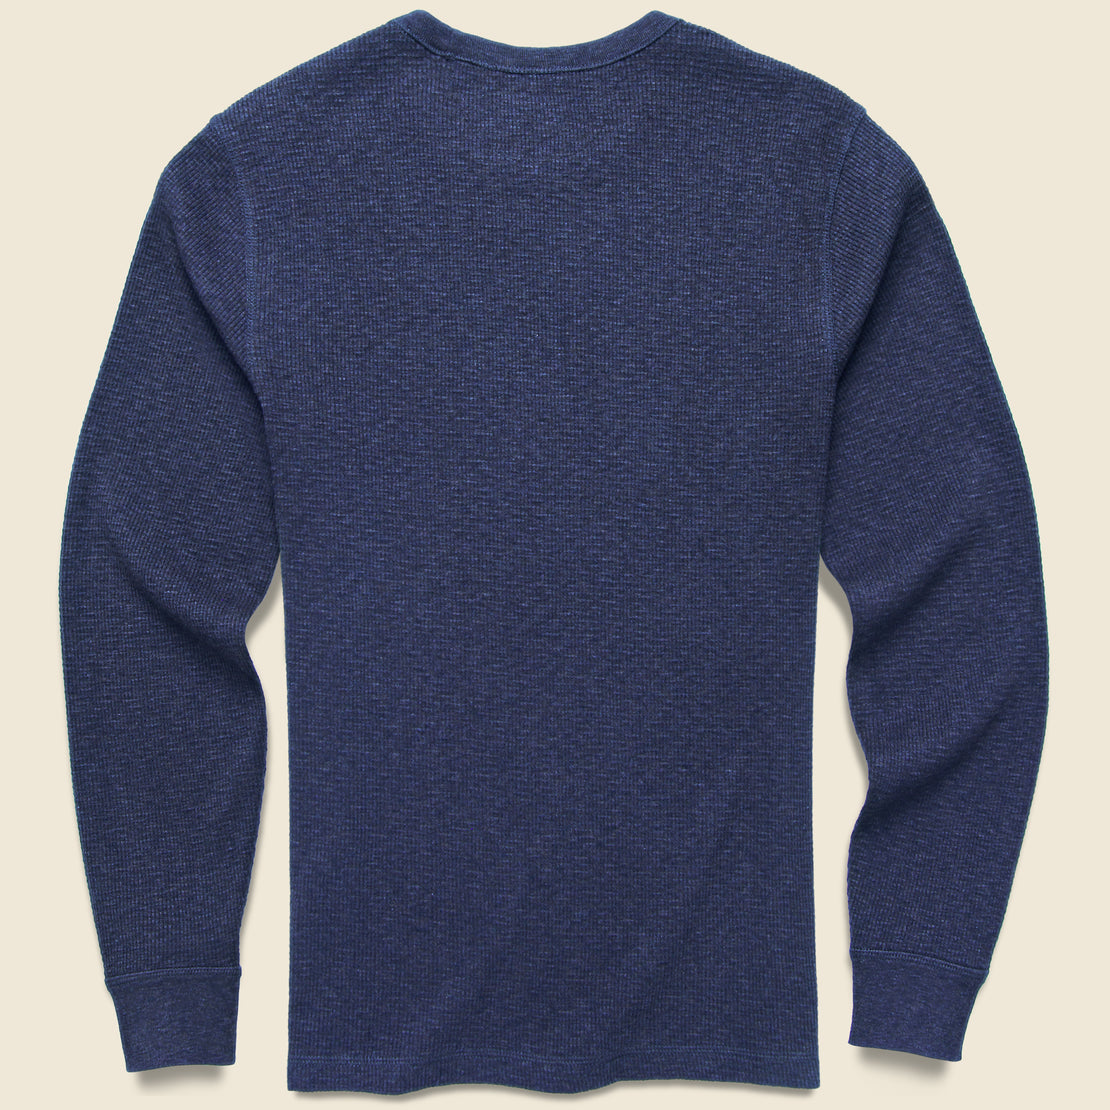 Thermal Surplus Crew - Deep Sea Heather - Faherty - STAG Provisions - Tops - L/S Knit